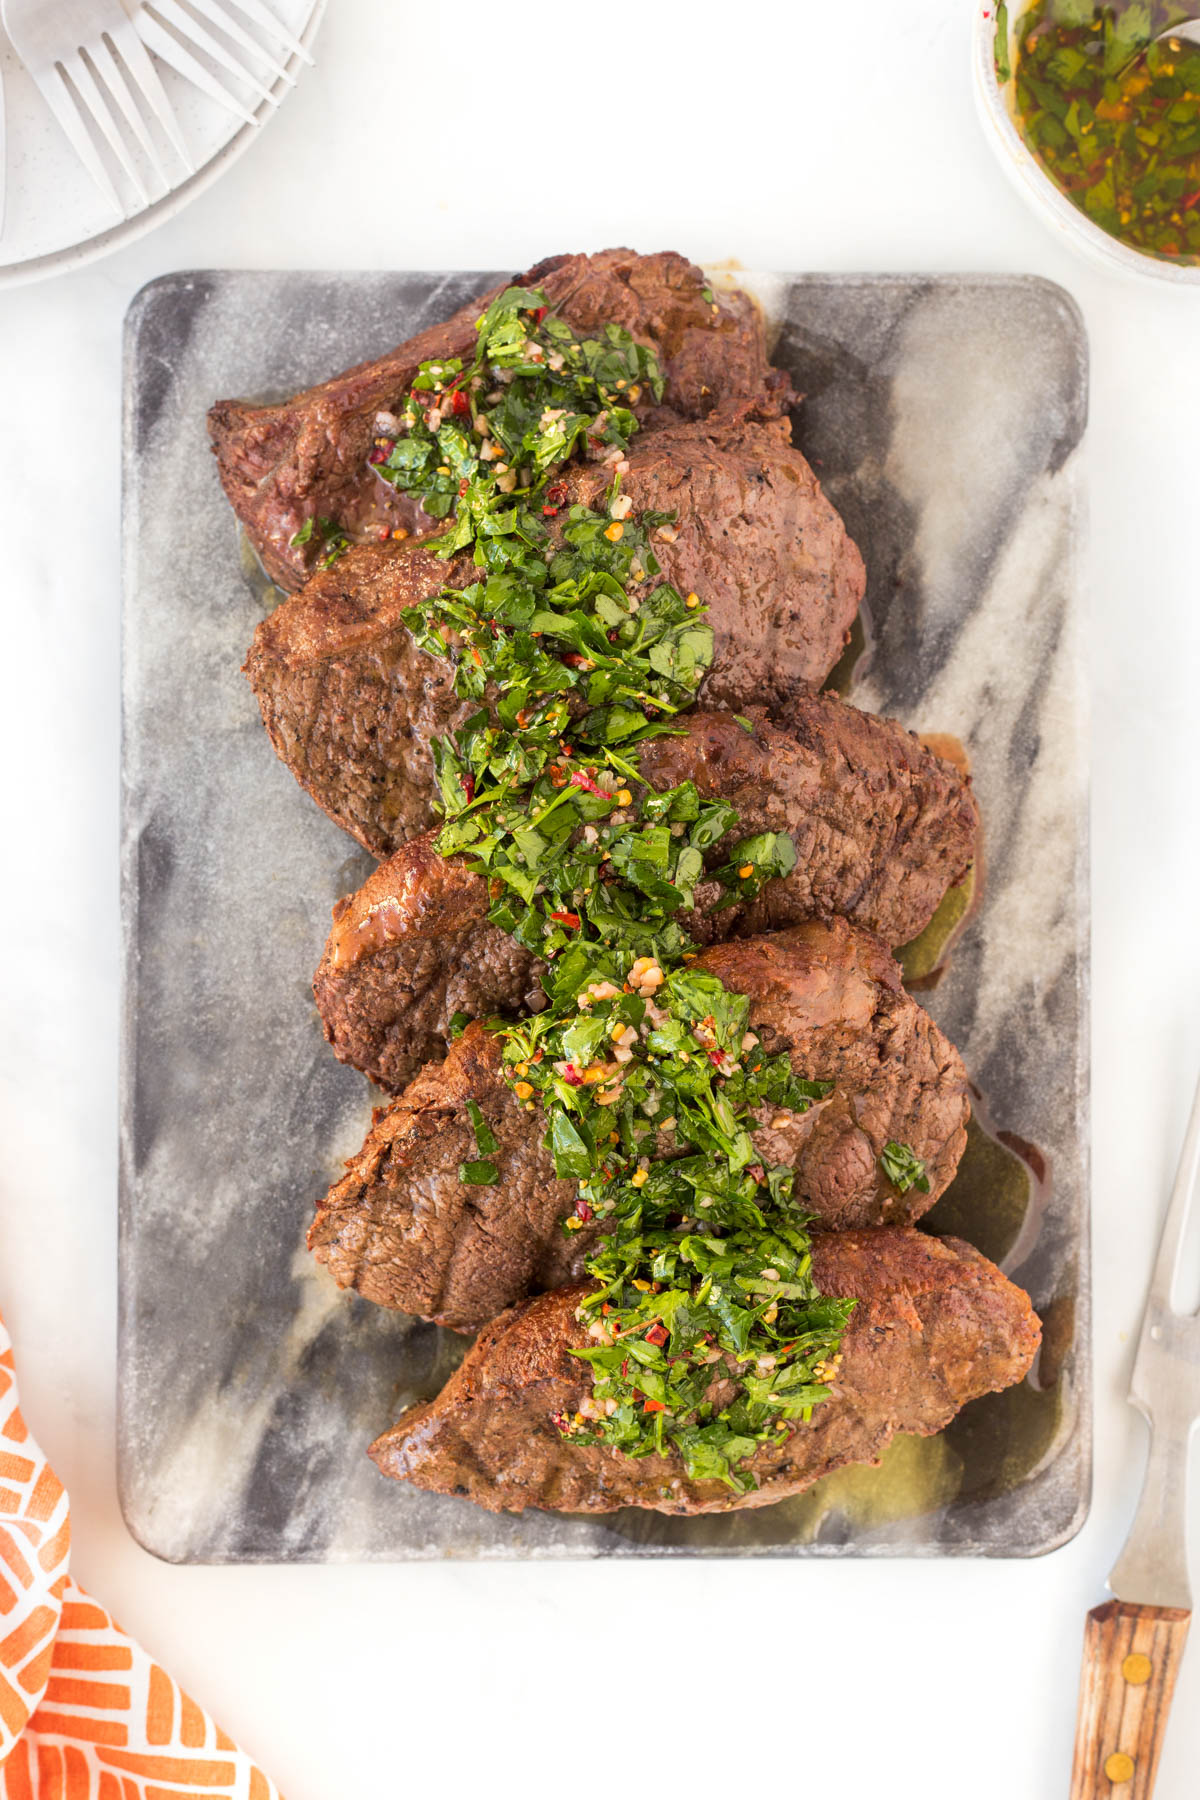 Grilled Picanha with chimichurri over top.